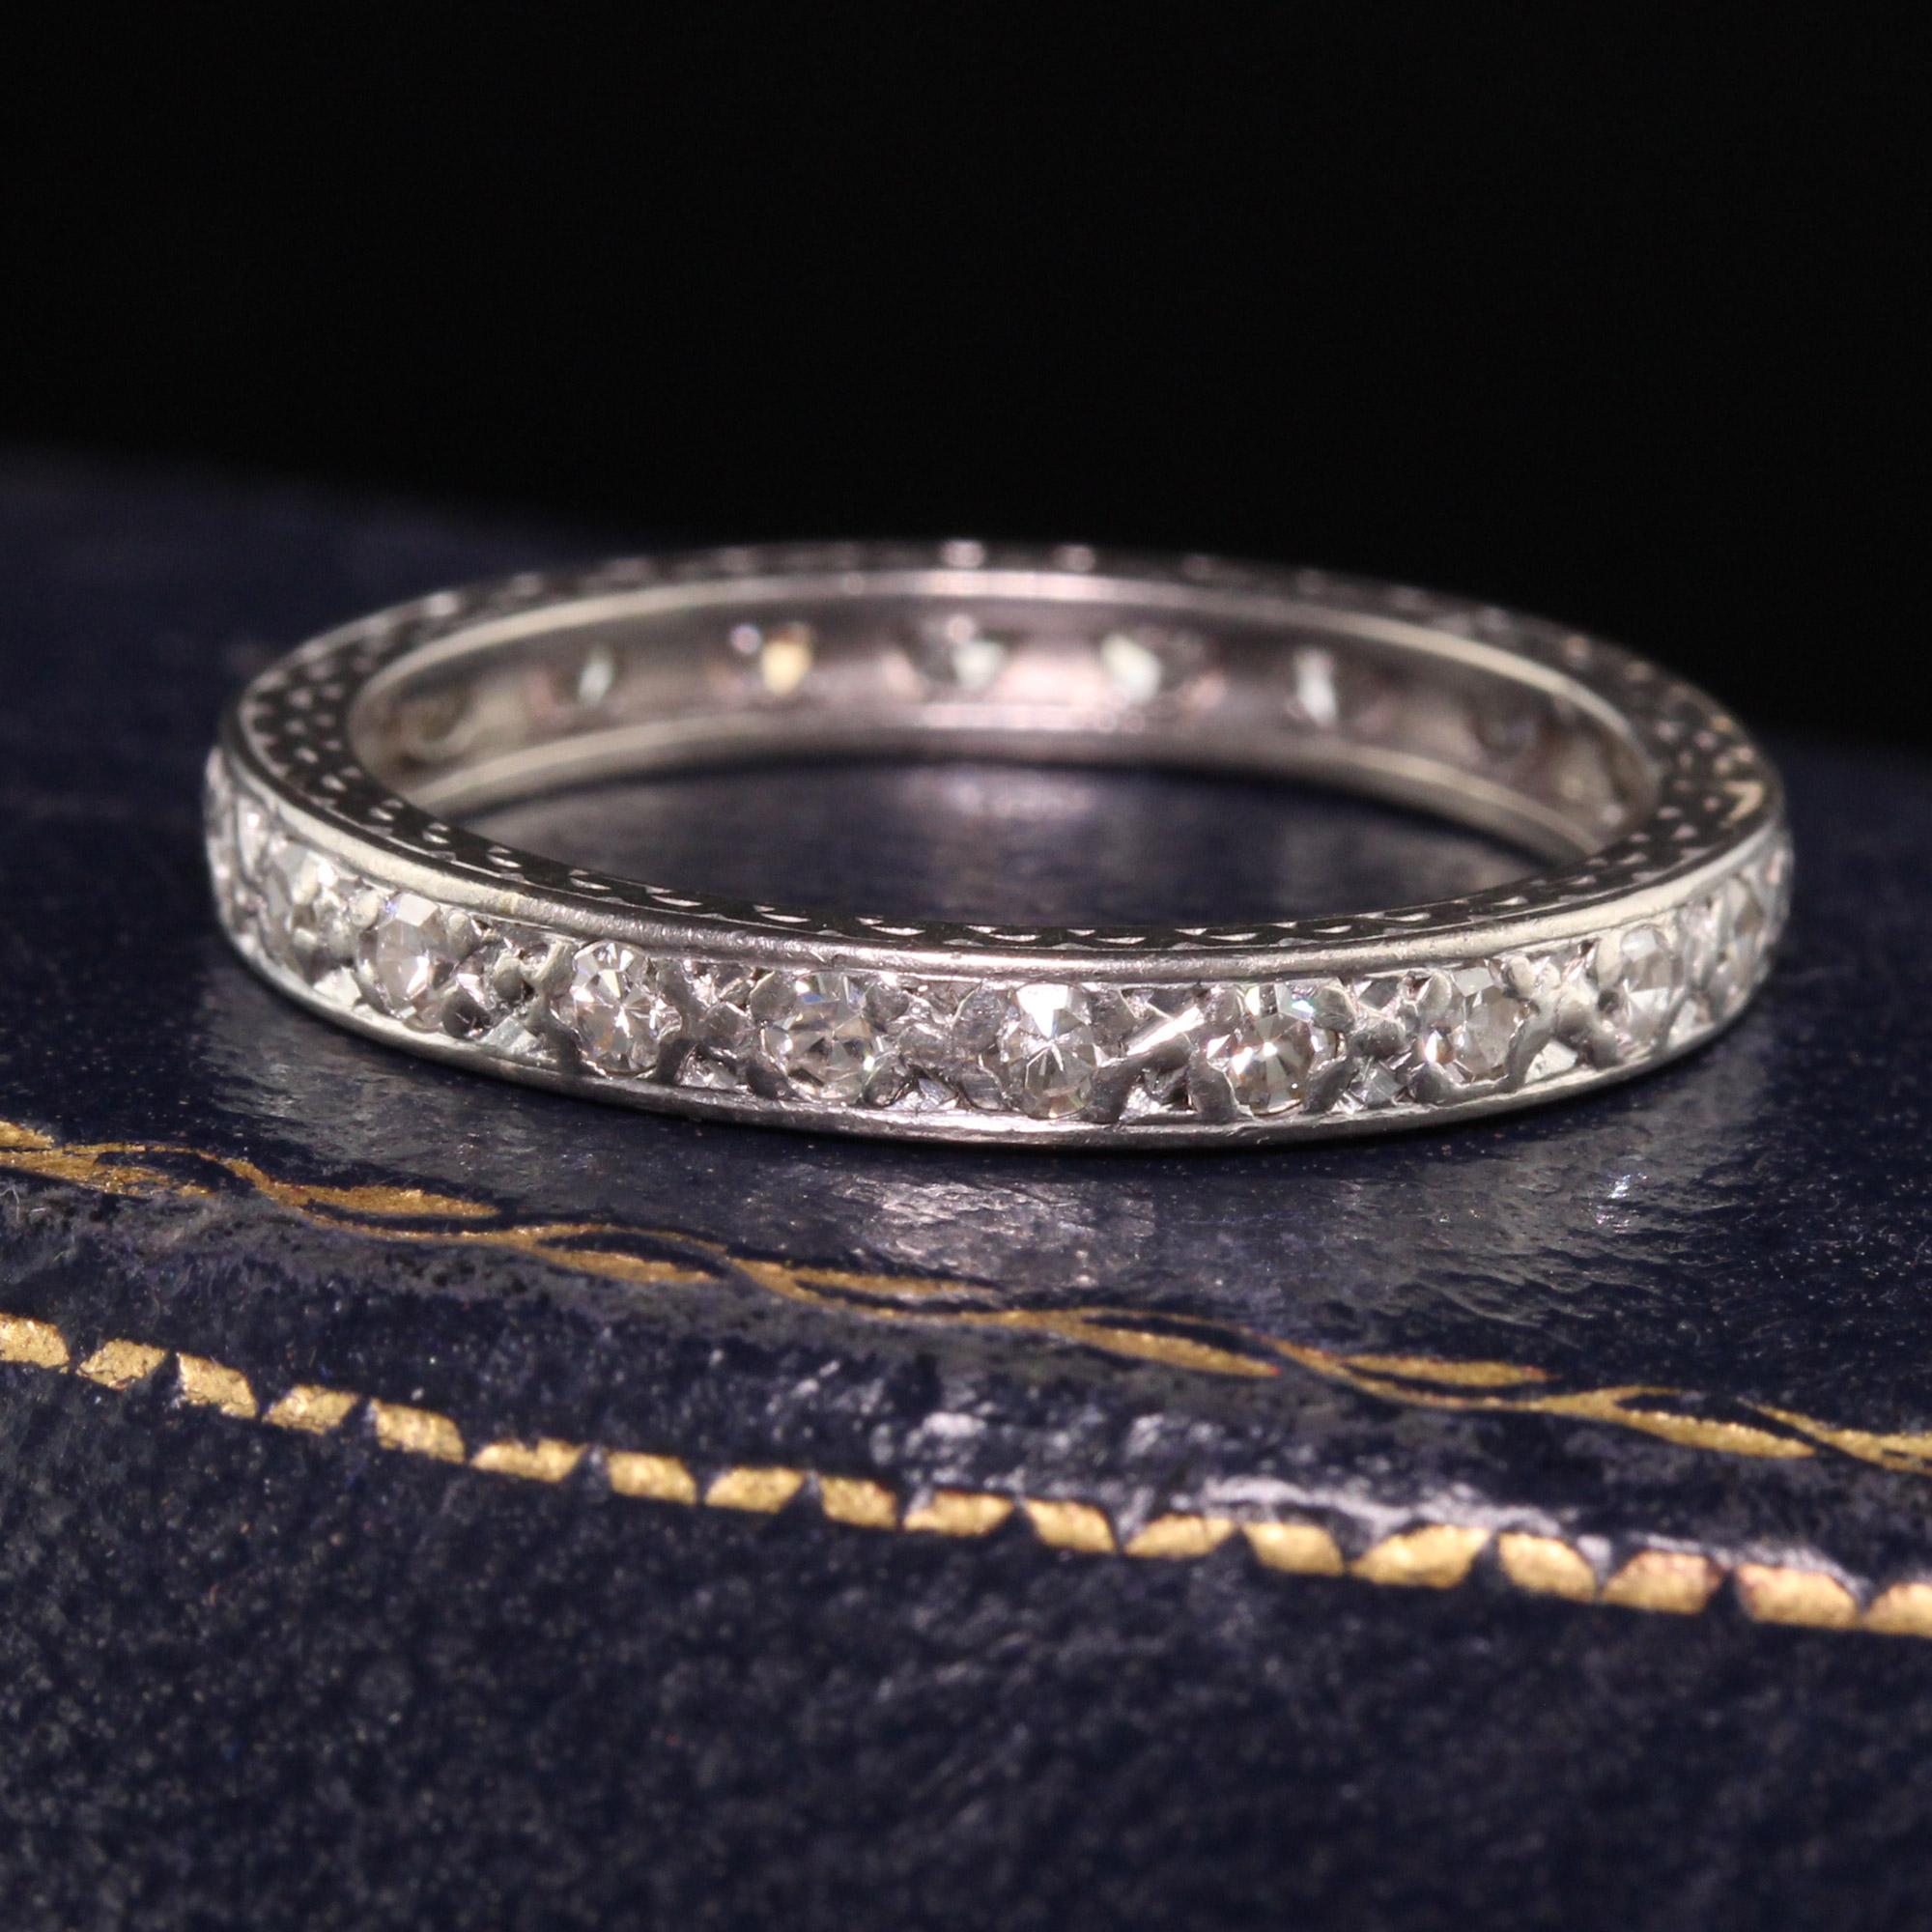 Beautiful Antique Art Deco Platinum Single Cut Diamond Eternity Band. This classic eternity band has single cut diamonds going around the entire ring. The engravings on the sides of the band are still visible and appears to have been sized at one